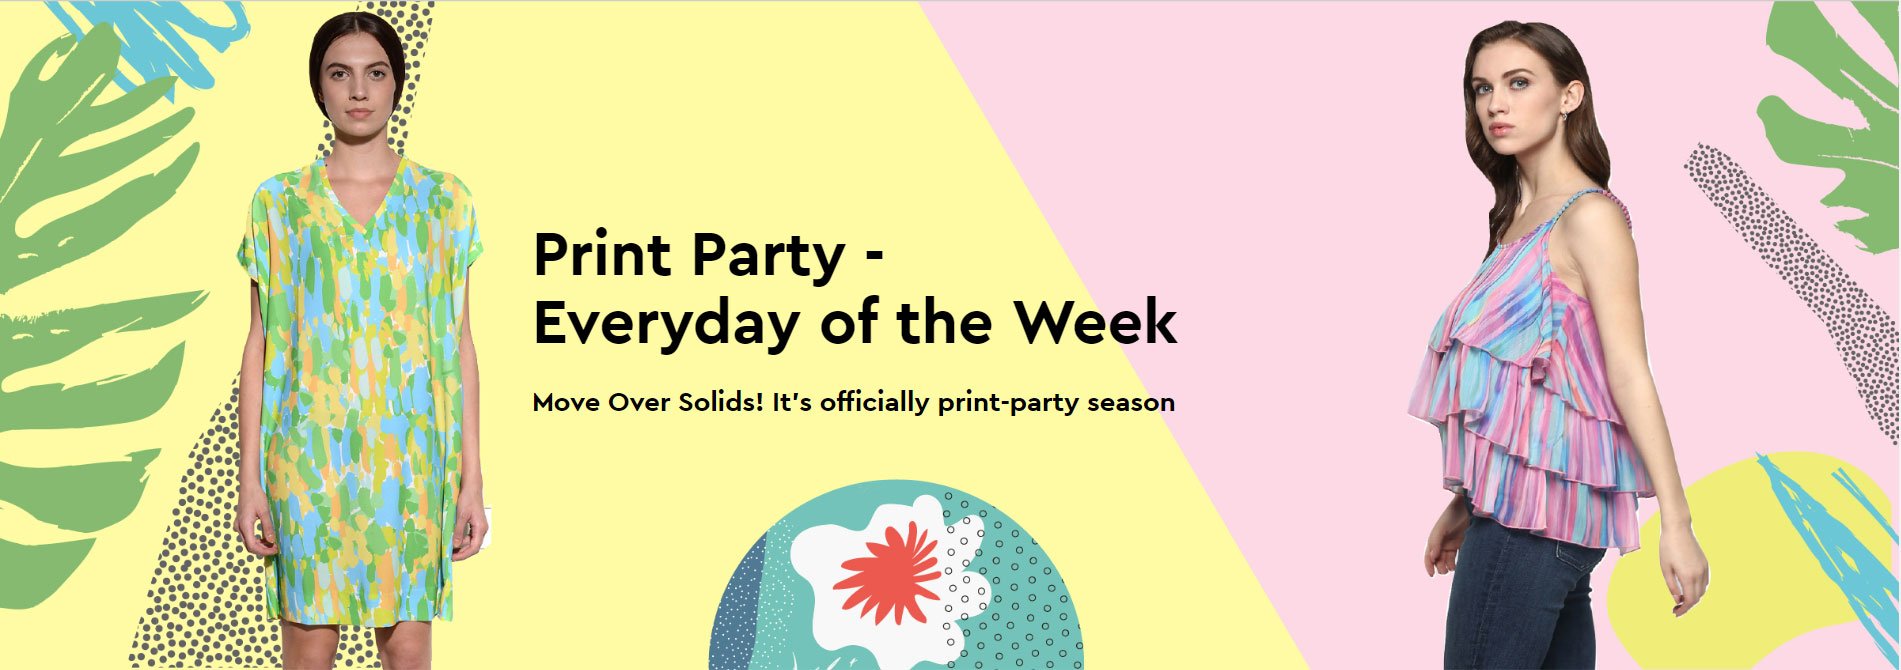 Print Party - Everyday of the Week